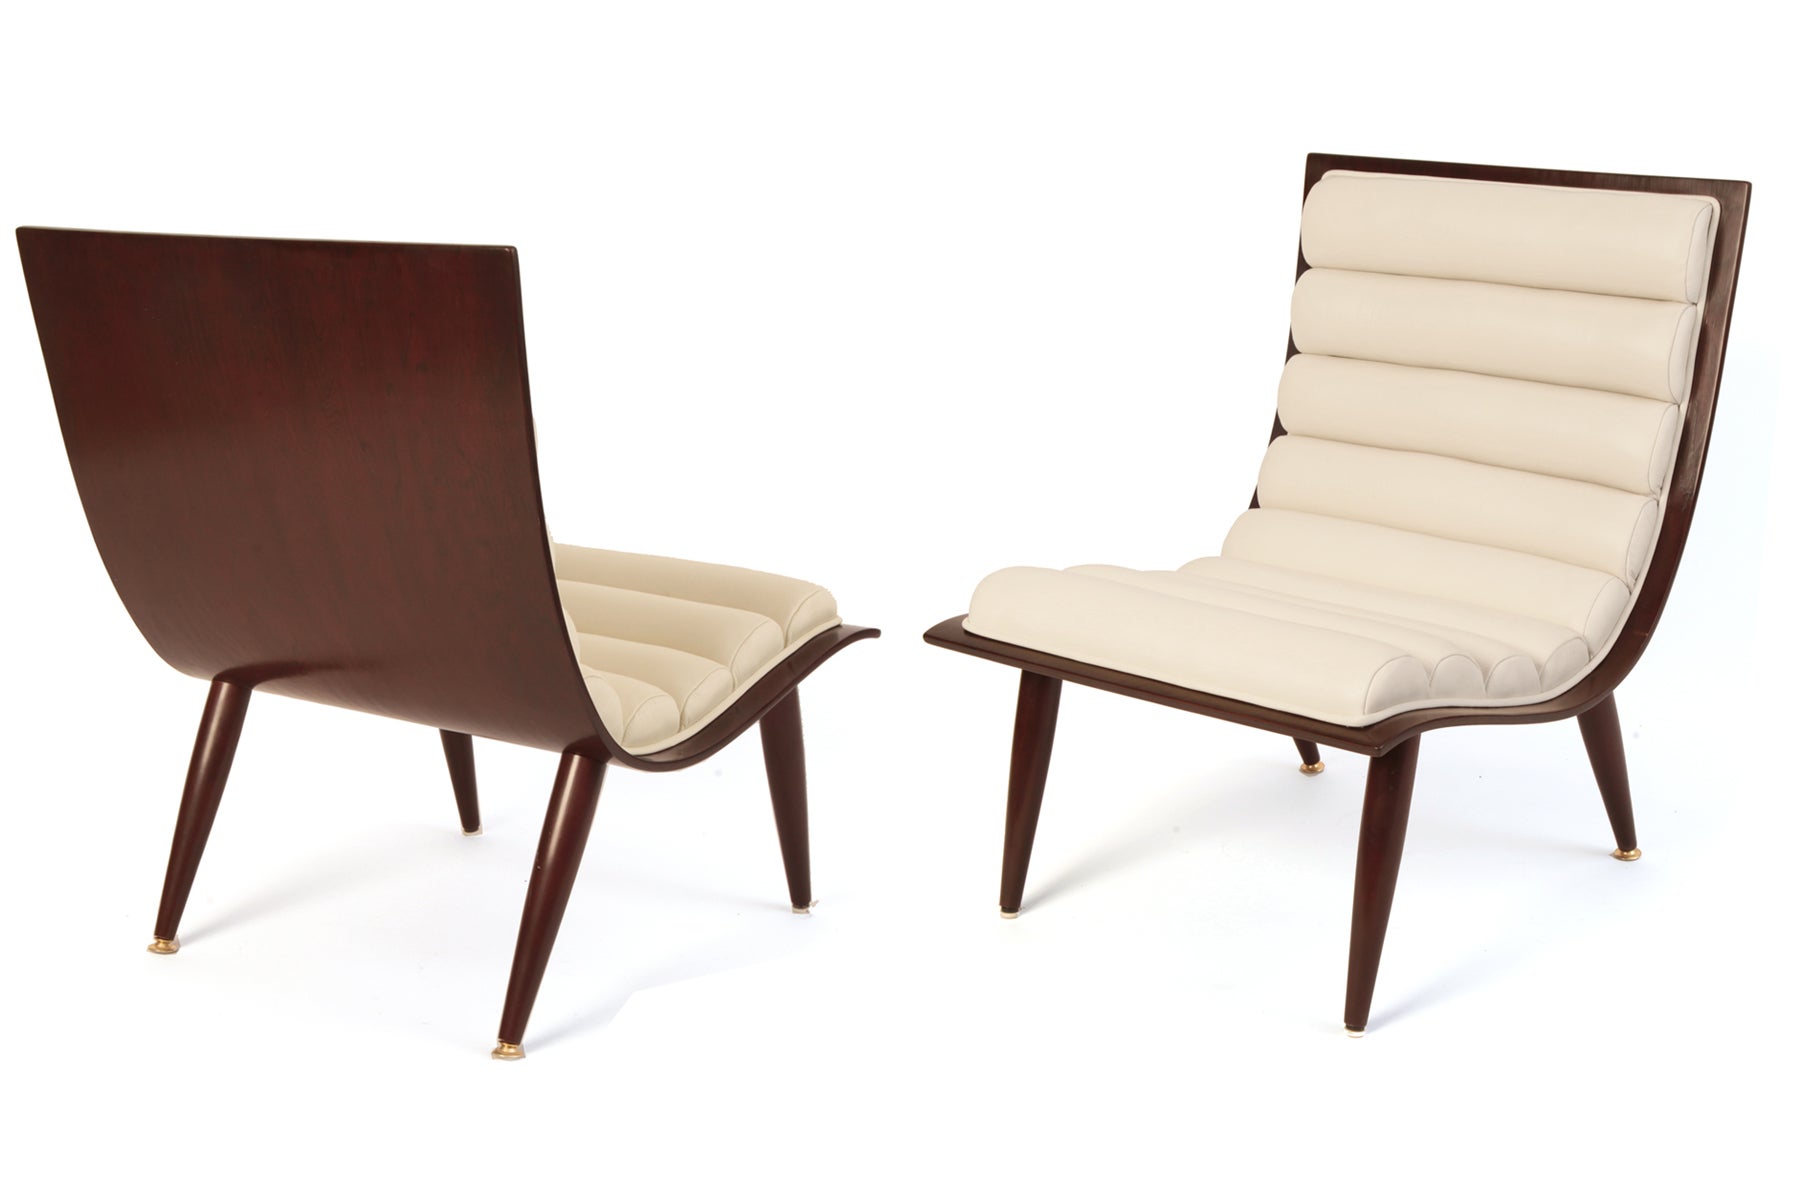 Elegant Bentwood & Rolled Leather Lounge Chairs